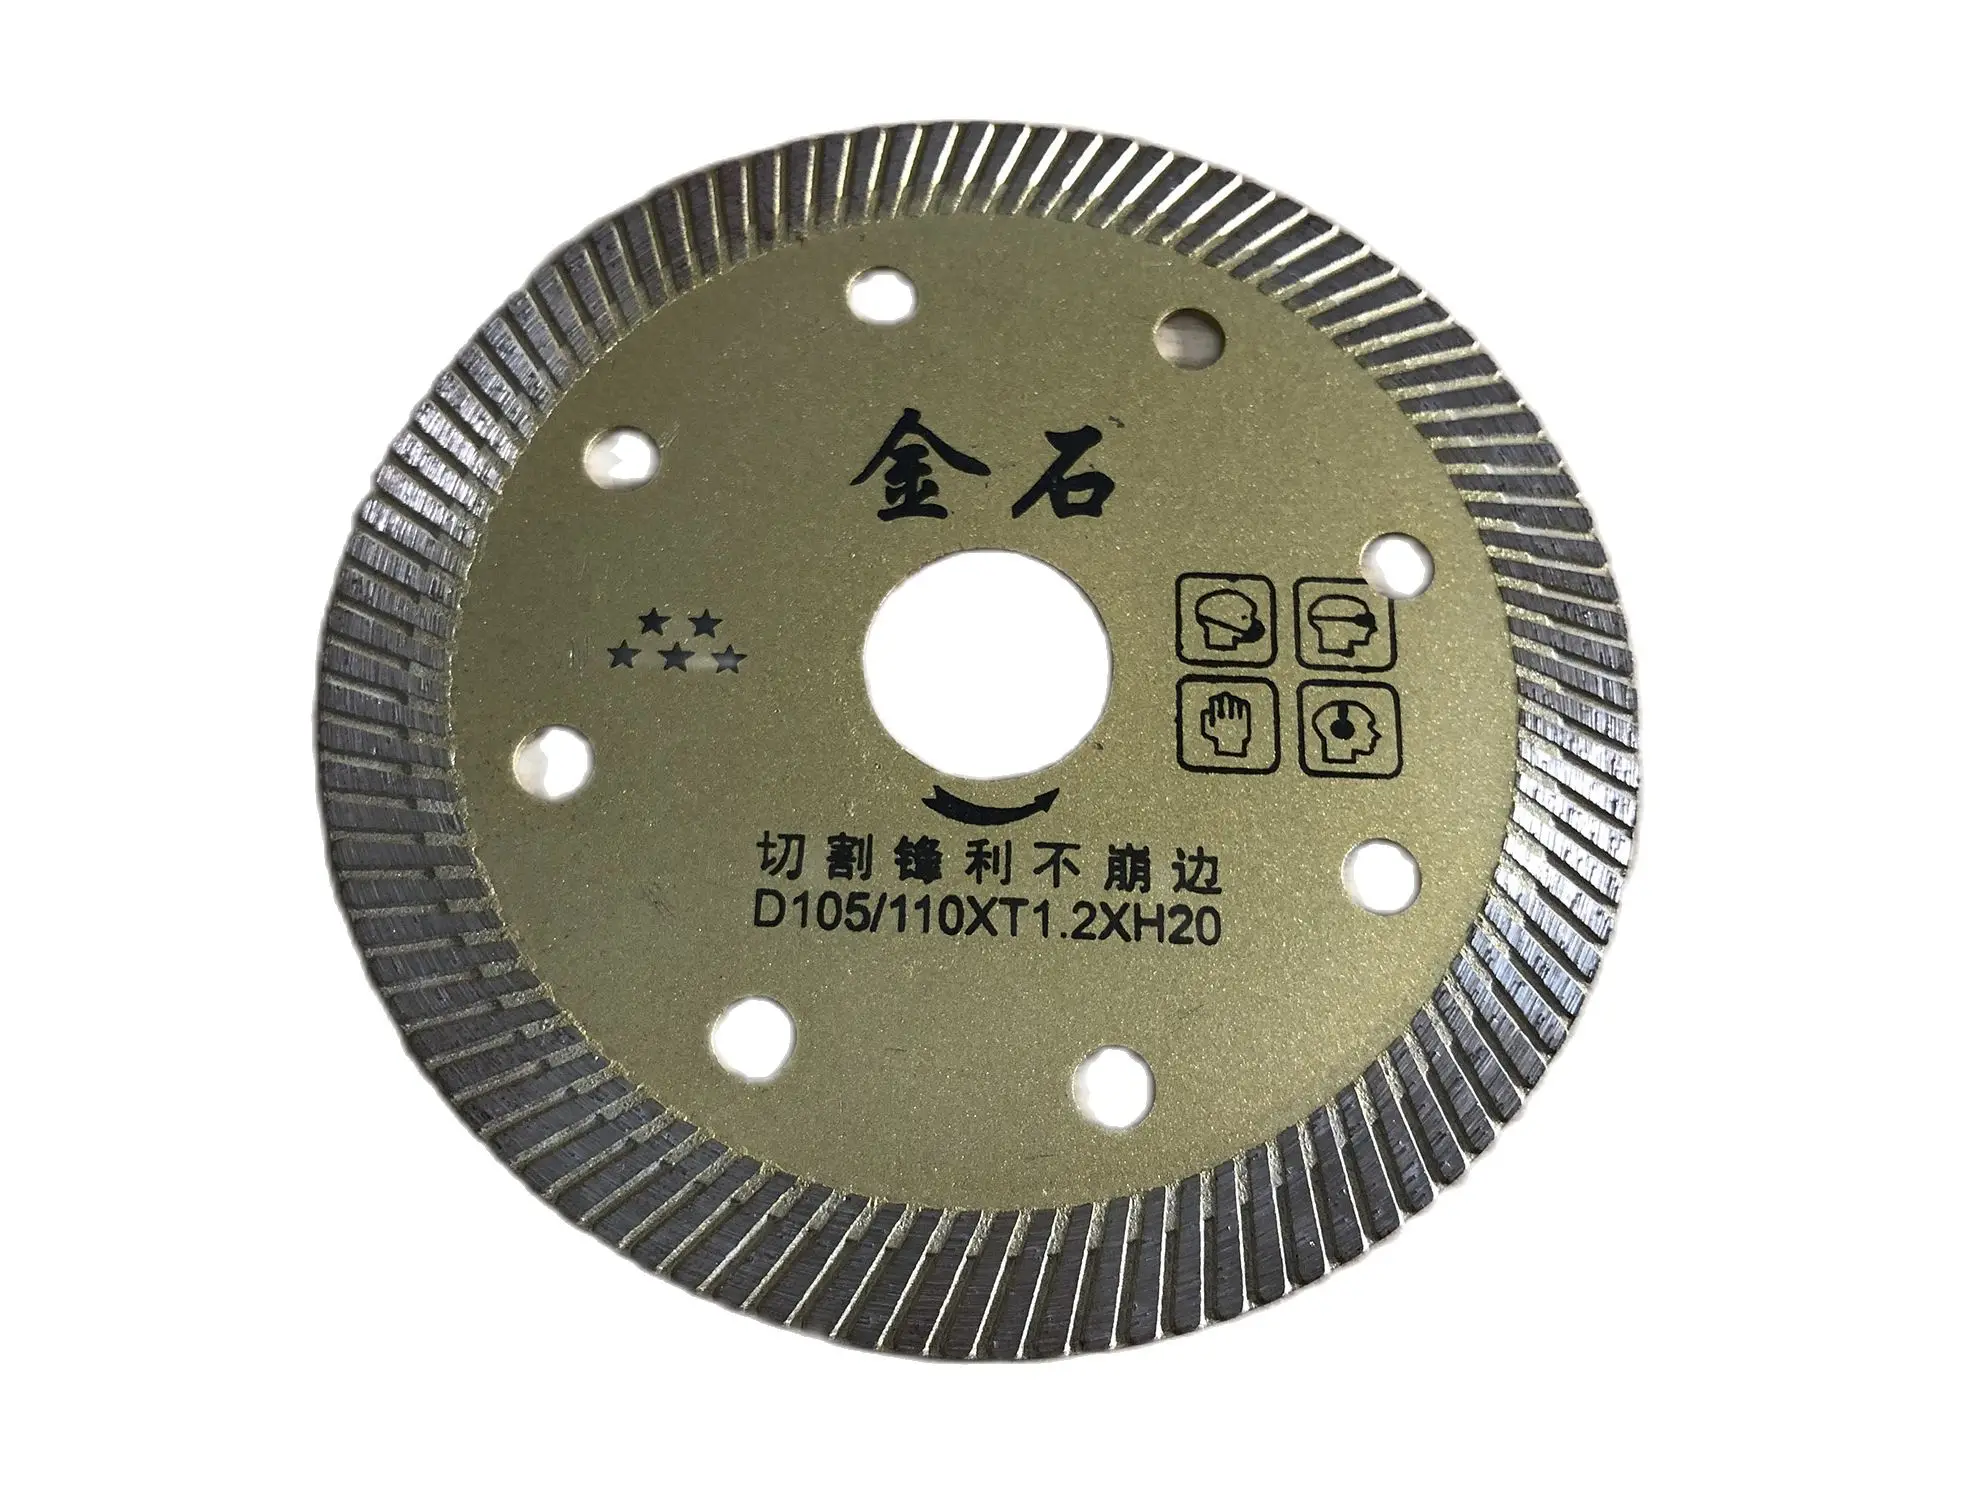 

105mm Ultra-thin Ceramic Tile And Floor Tile Cutting Blade For Cutting Glass Dry Slice Without Chipping Edge Saw Blade